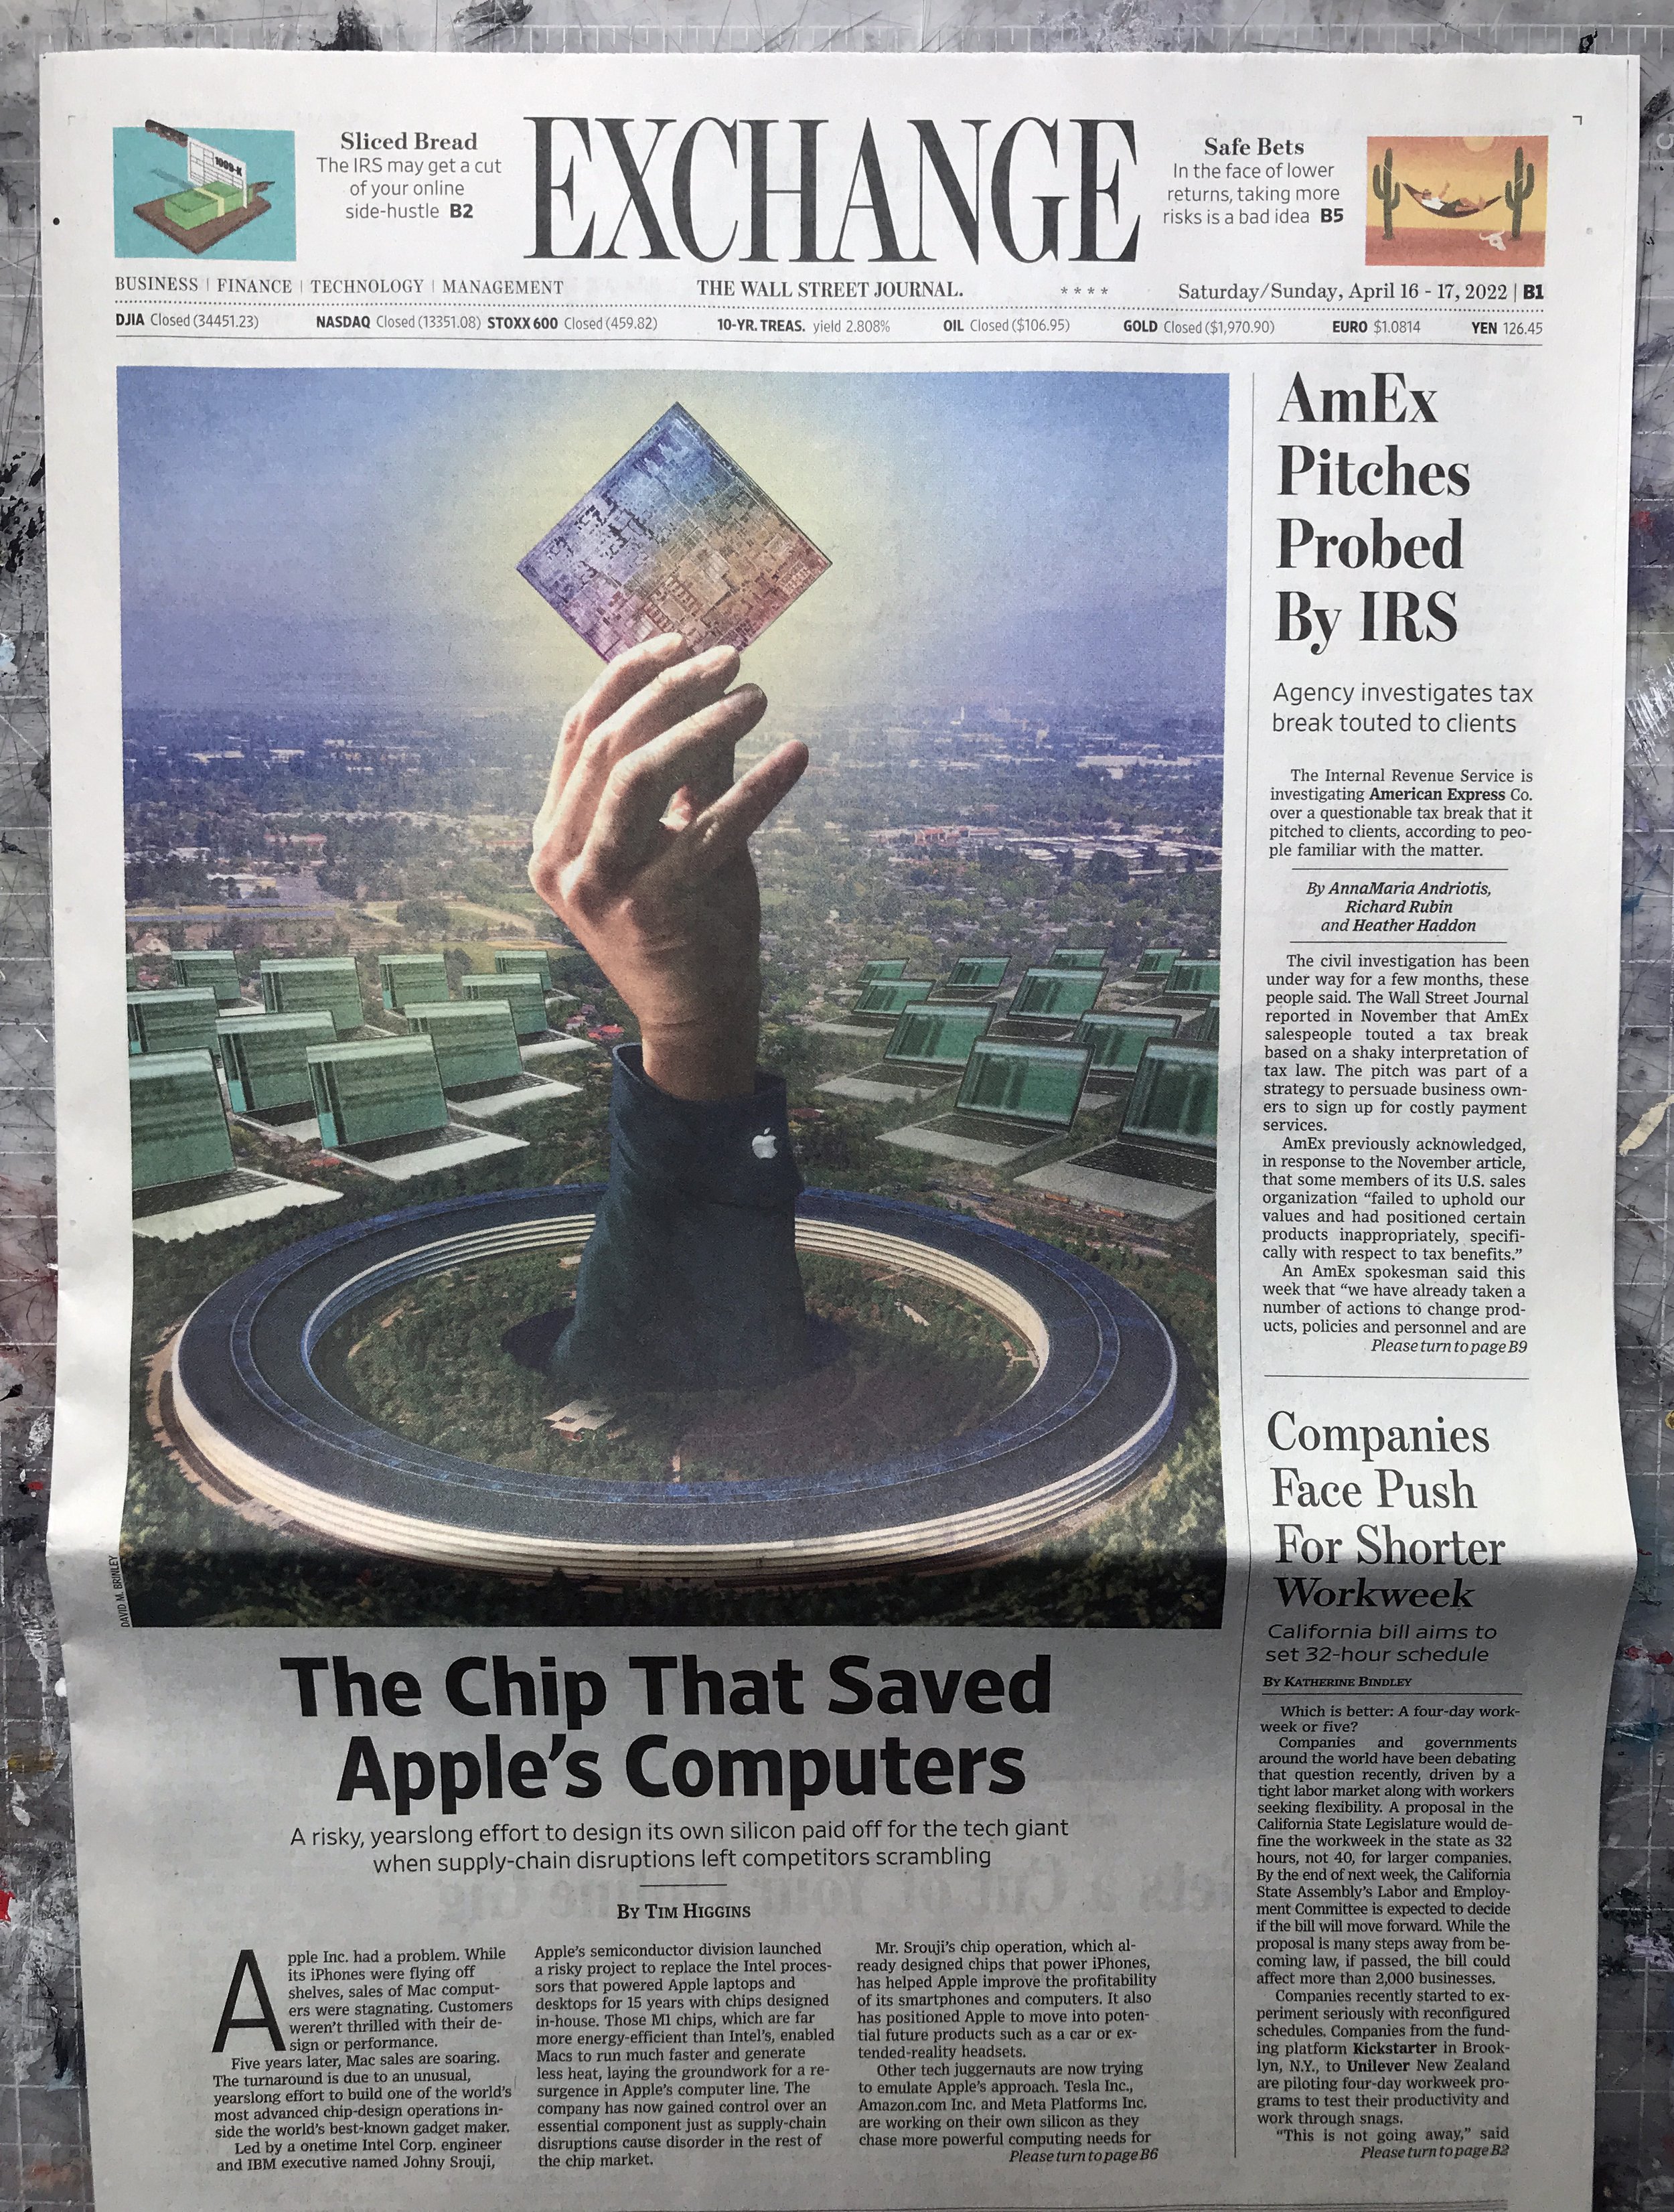   The Chips That Rebooted the Mac |  Apple’s risky, yearslong effort to design its own silicon paid off when supply-chain disruptions left competitors scrambling | April 16, 2022 